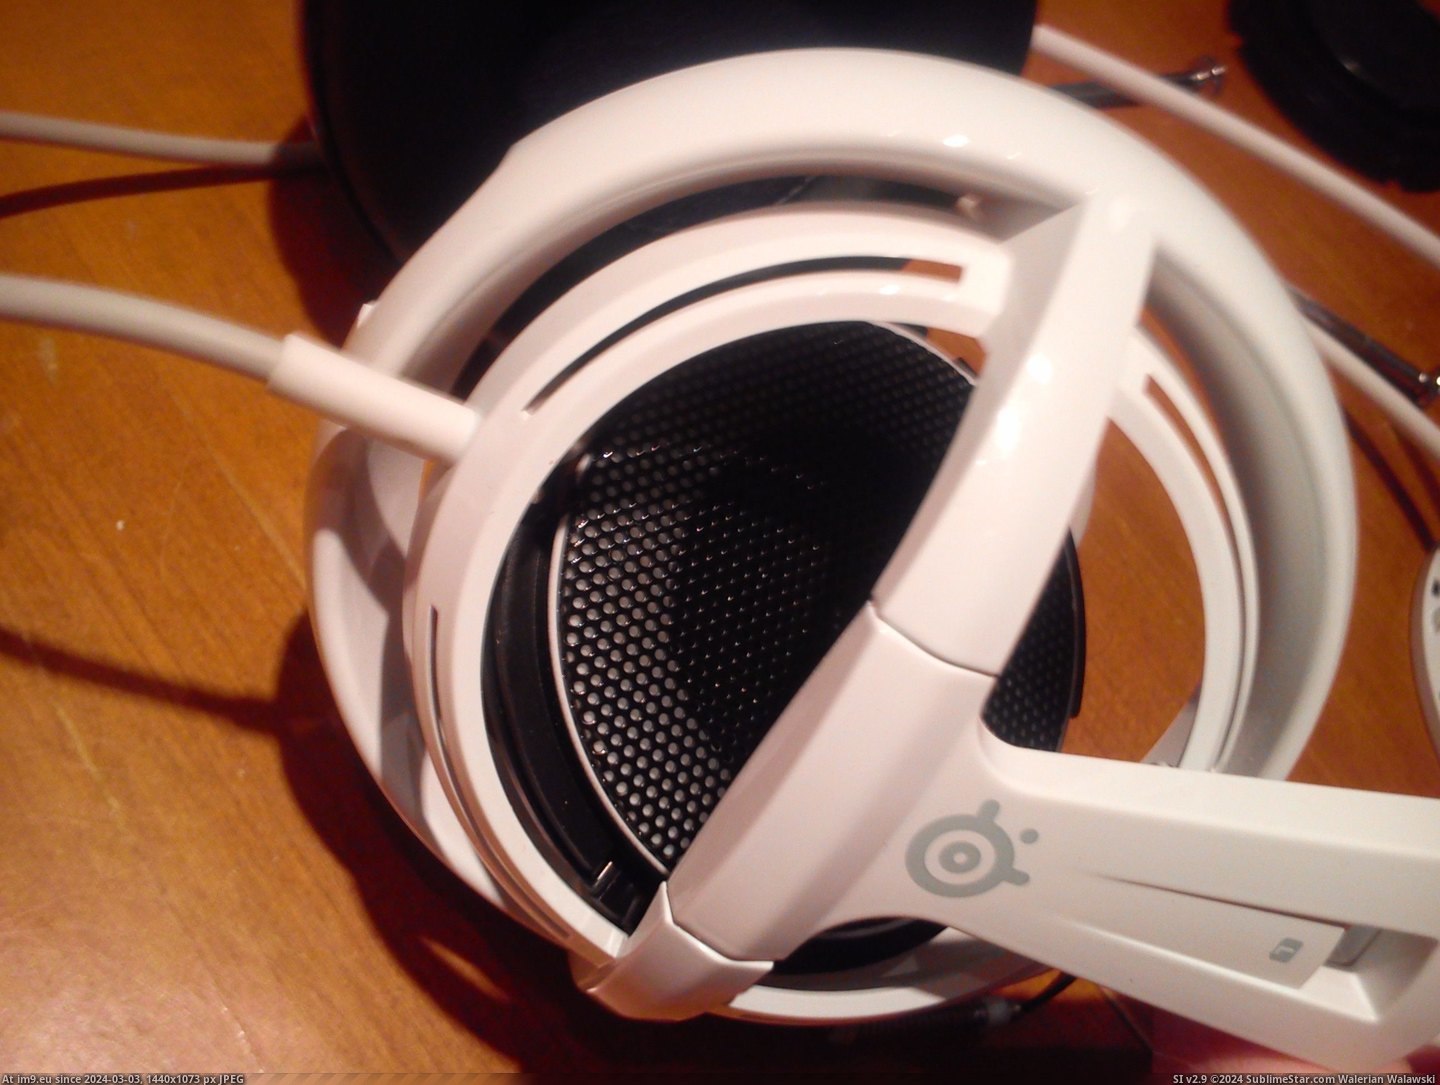 #Gaming #Headset #Modified [Gaming] I modified my headset. 4 Pic. (Bild von album My r/GAMING favs))